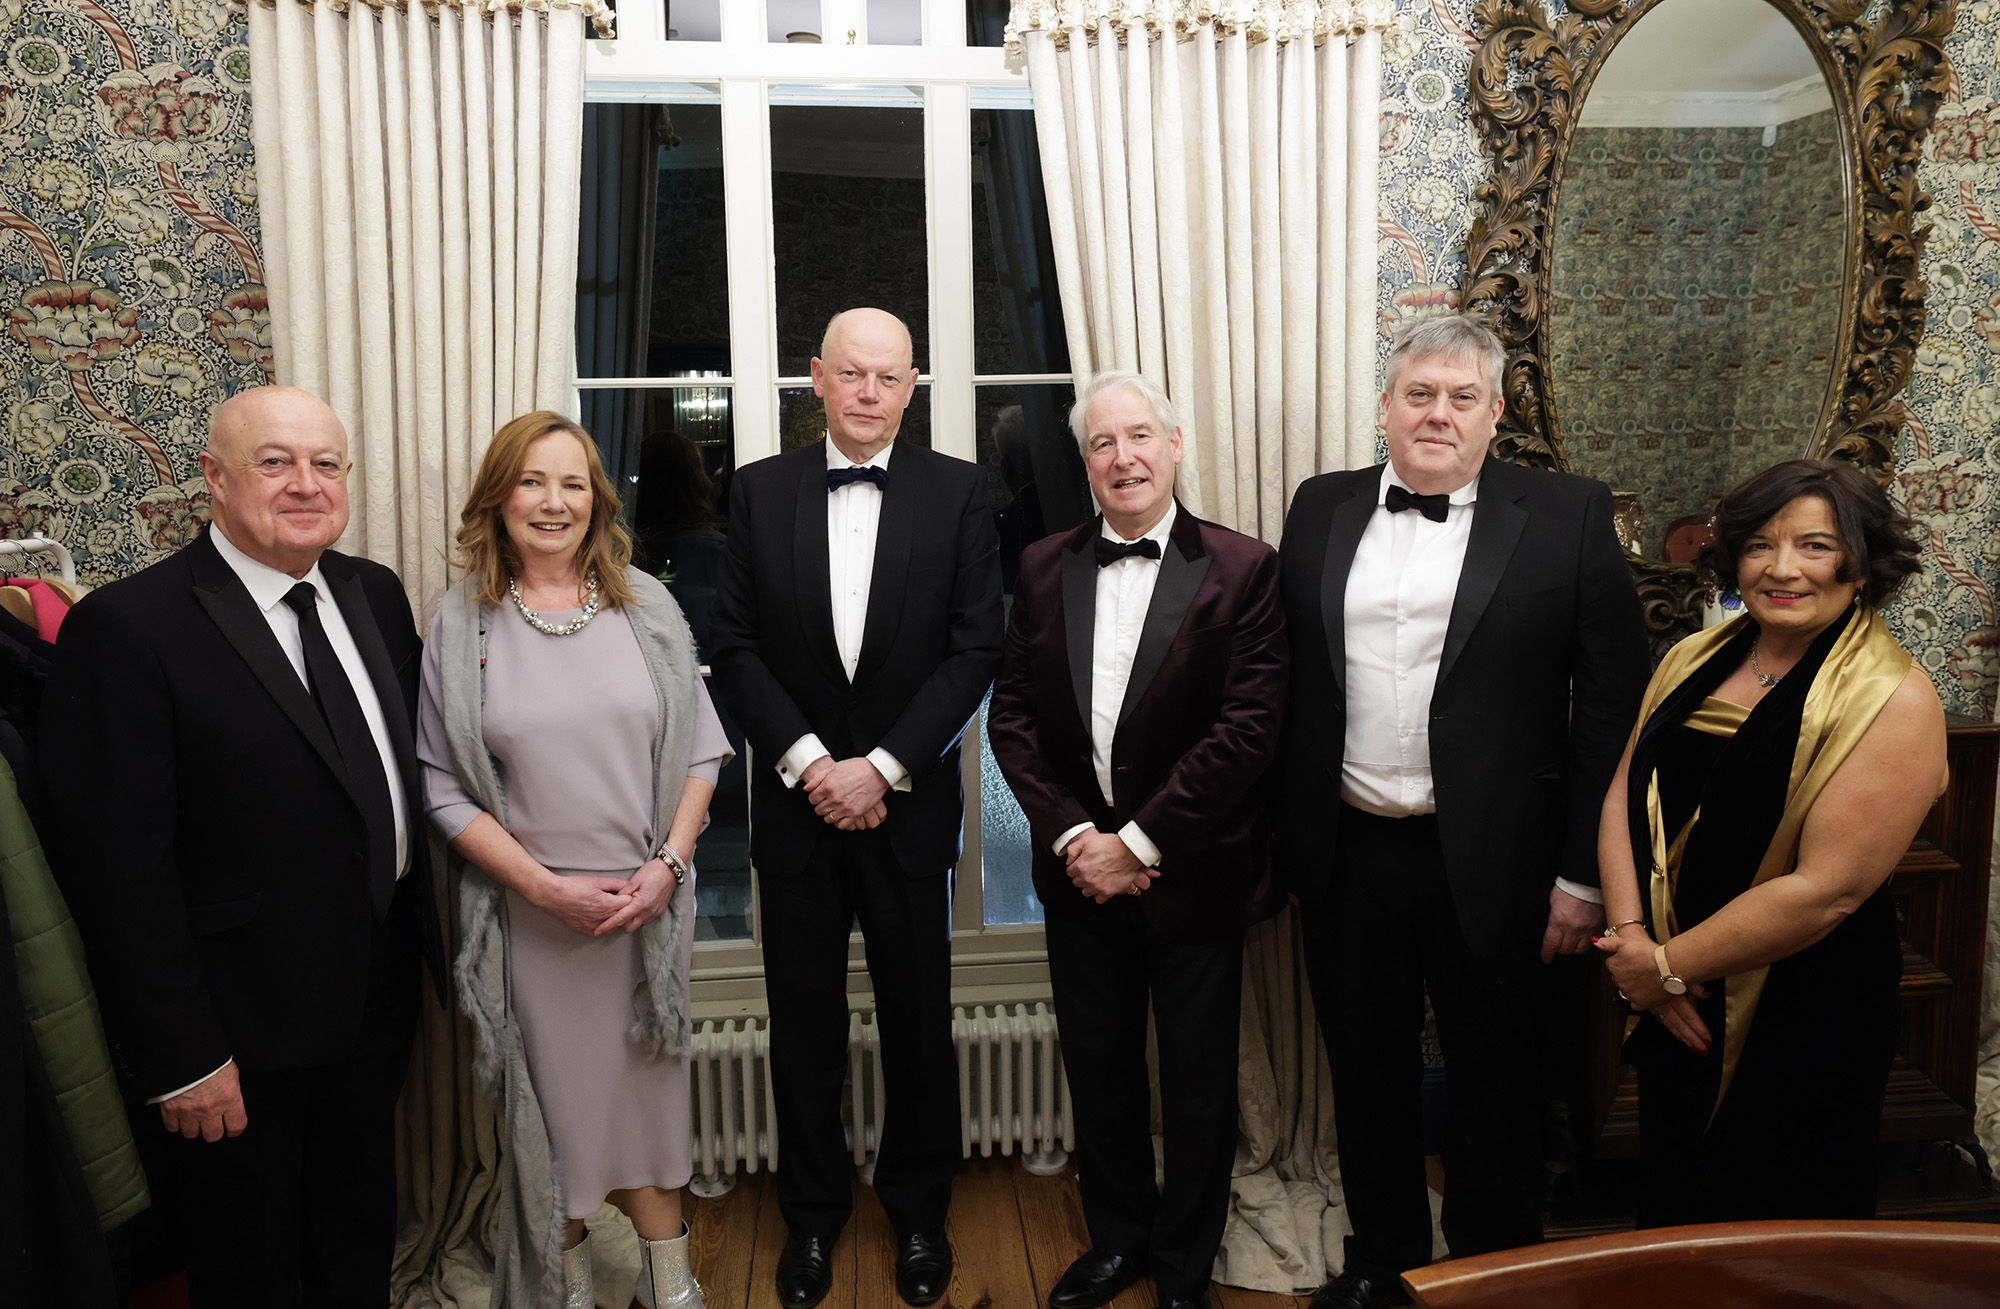 #InPictures: Irish Chief Justice joins lawyers in Newry